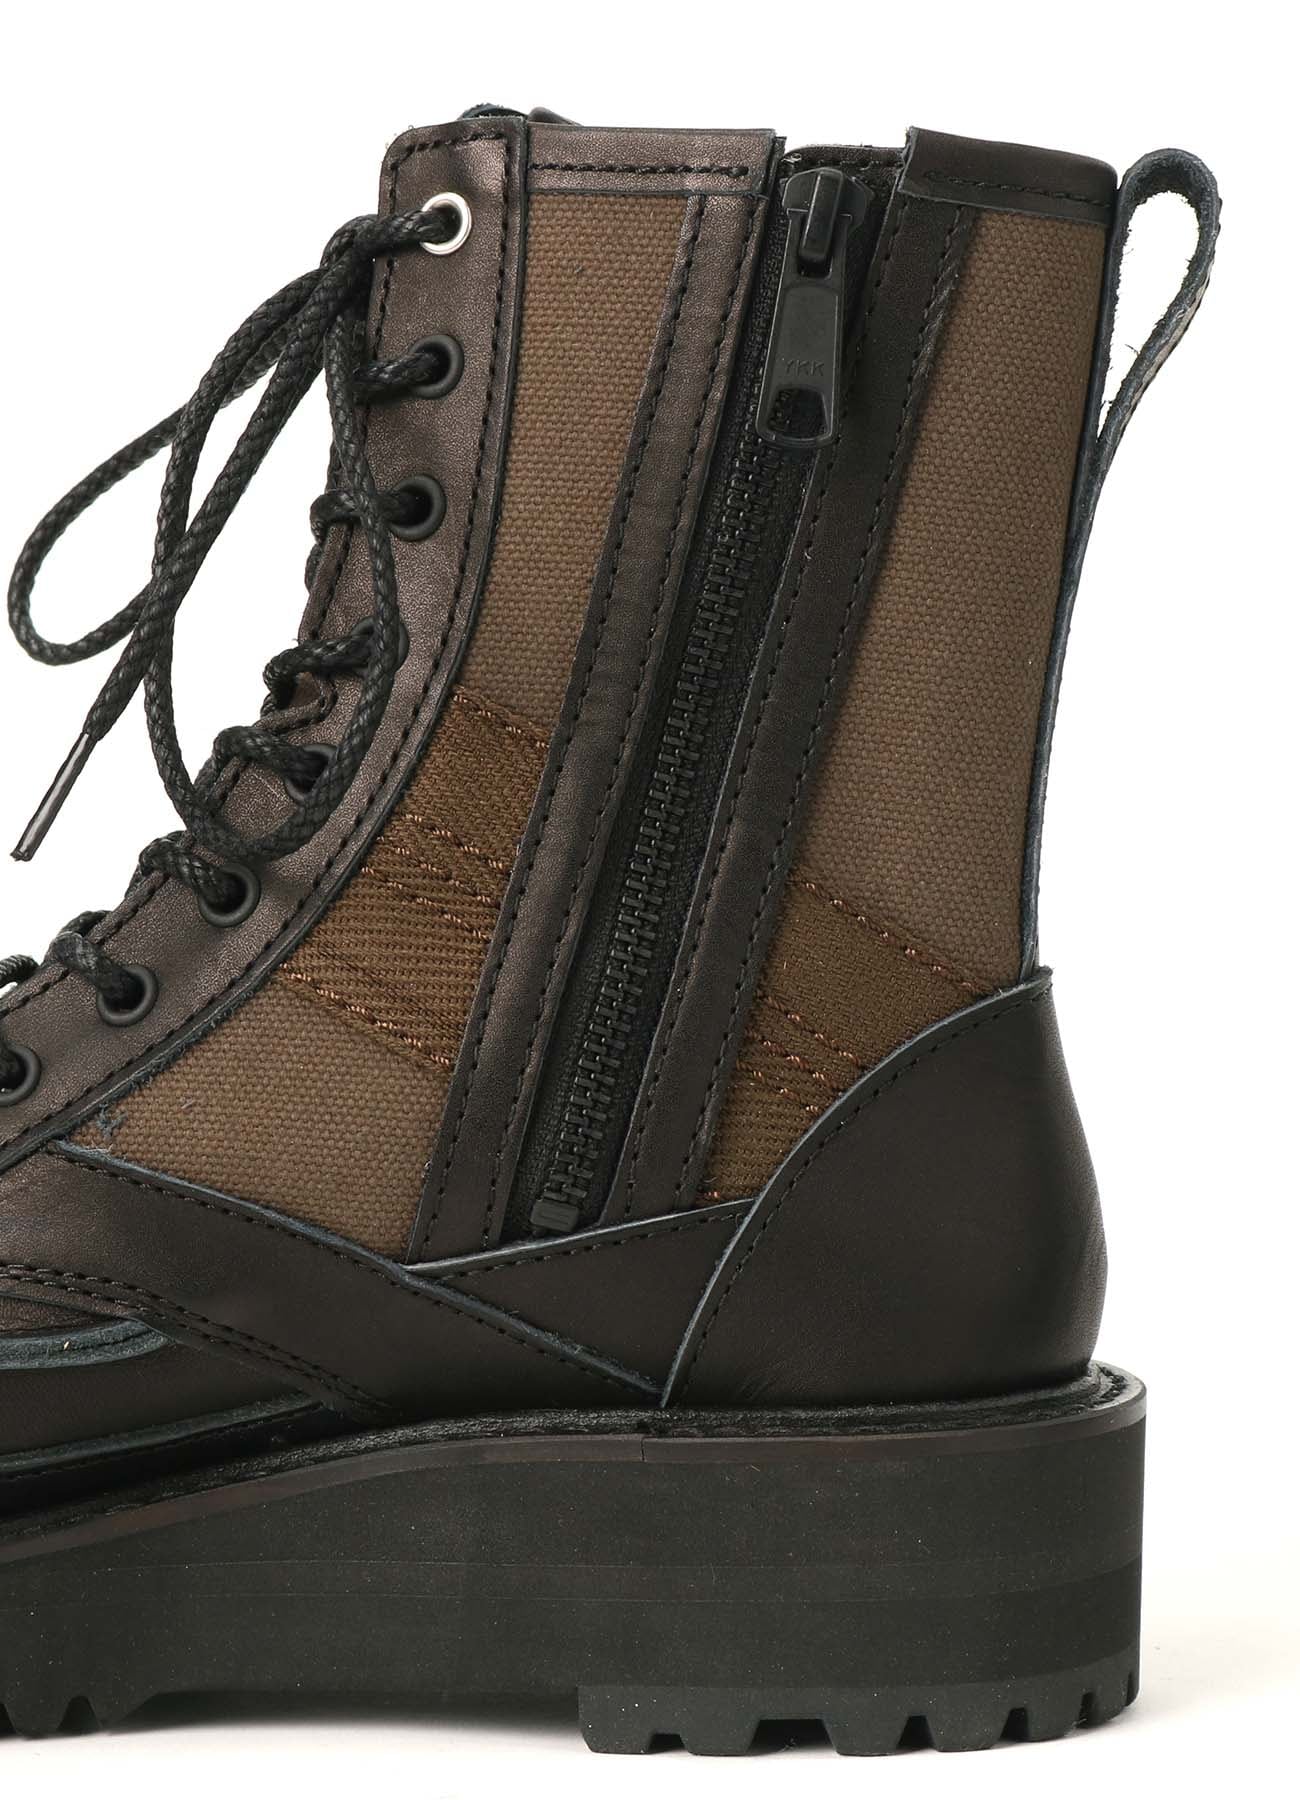 COTTON DUCK/LEATHER COMBINATION MILITARY BOOTS